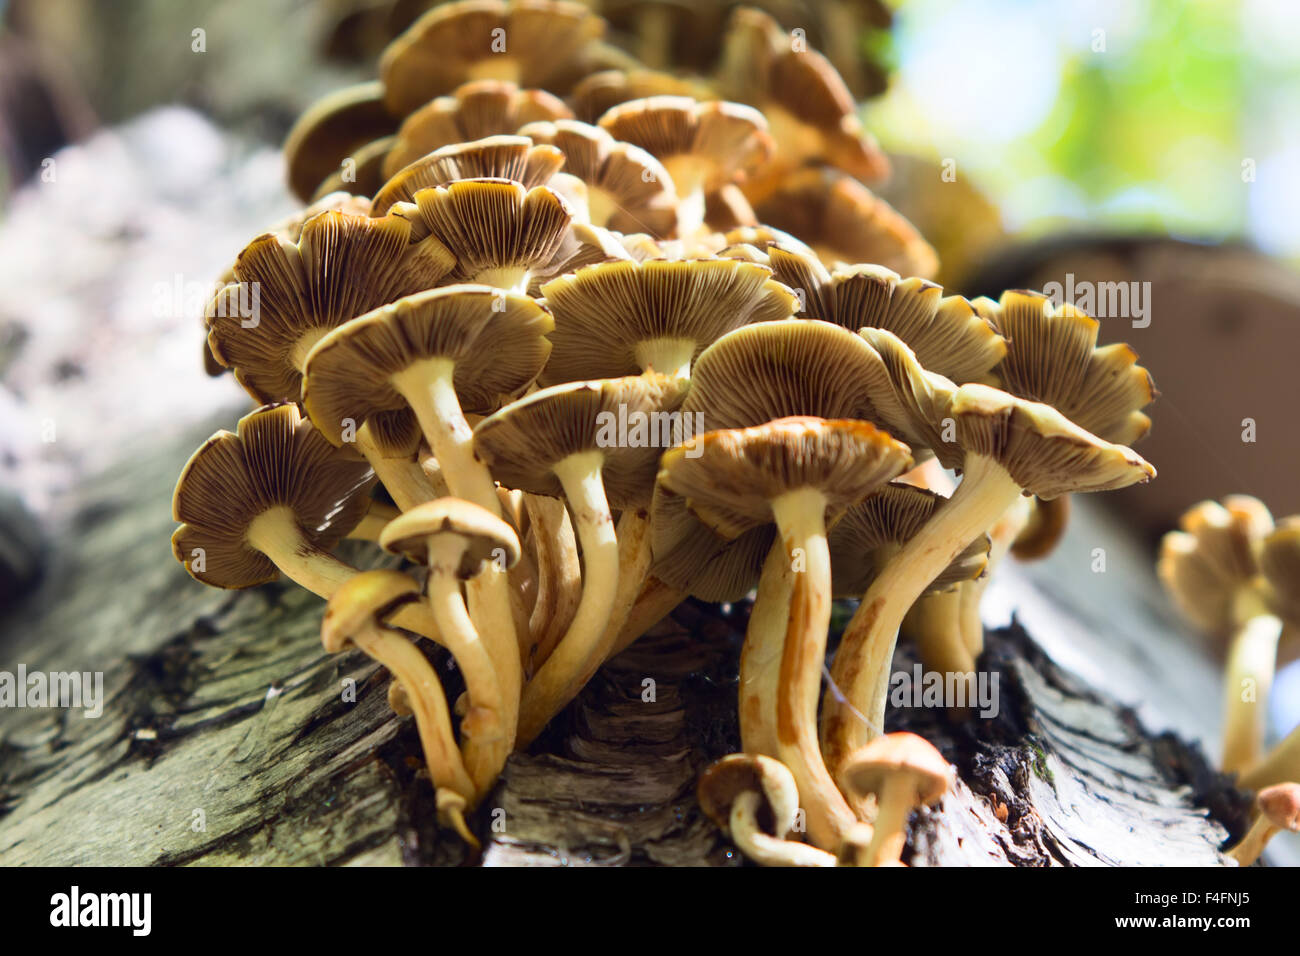 fungus Armillaria mellea in the forest Stock Photo